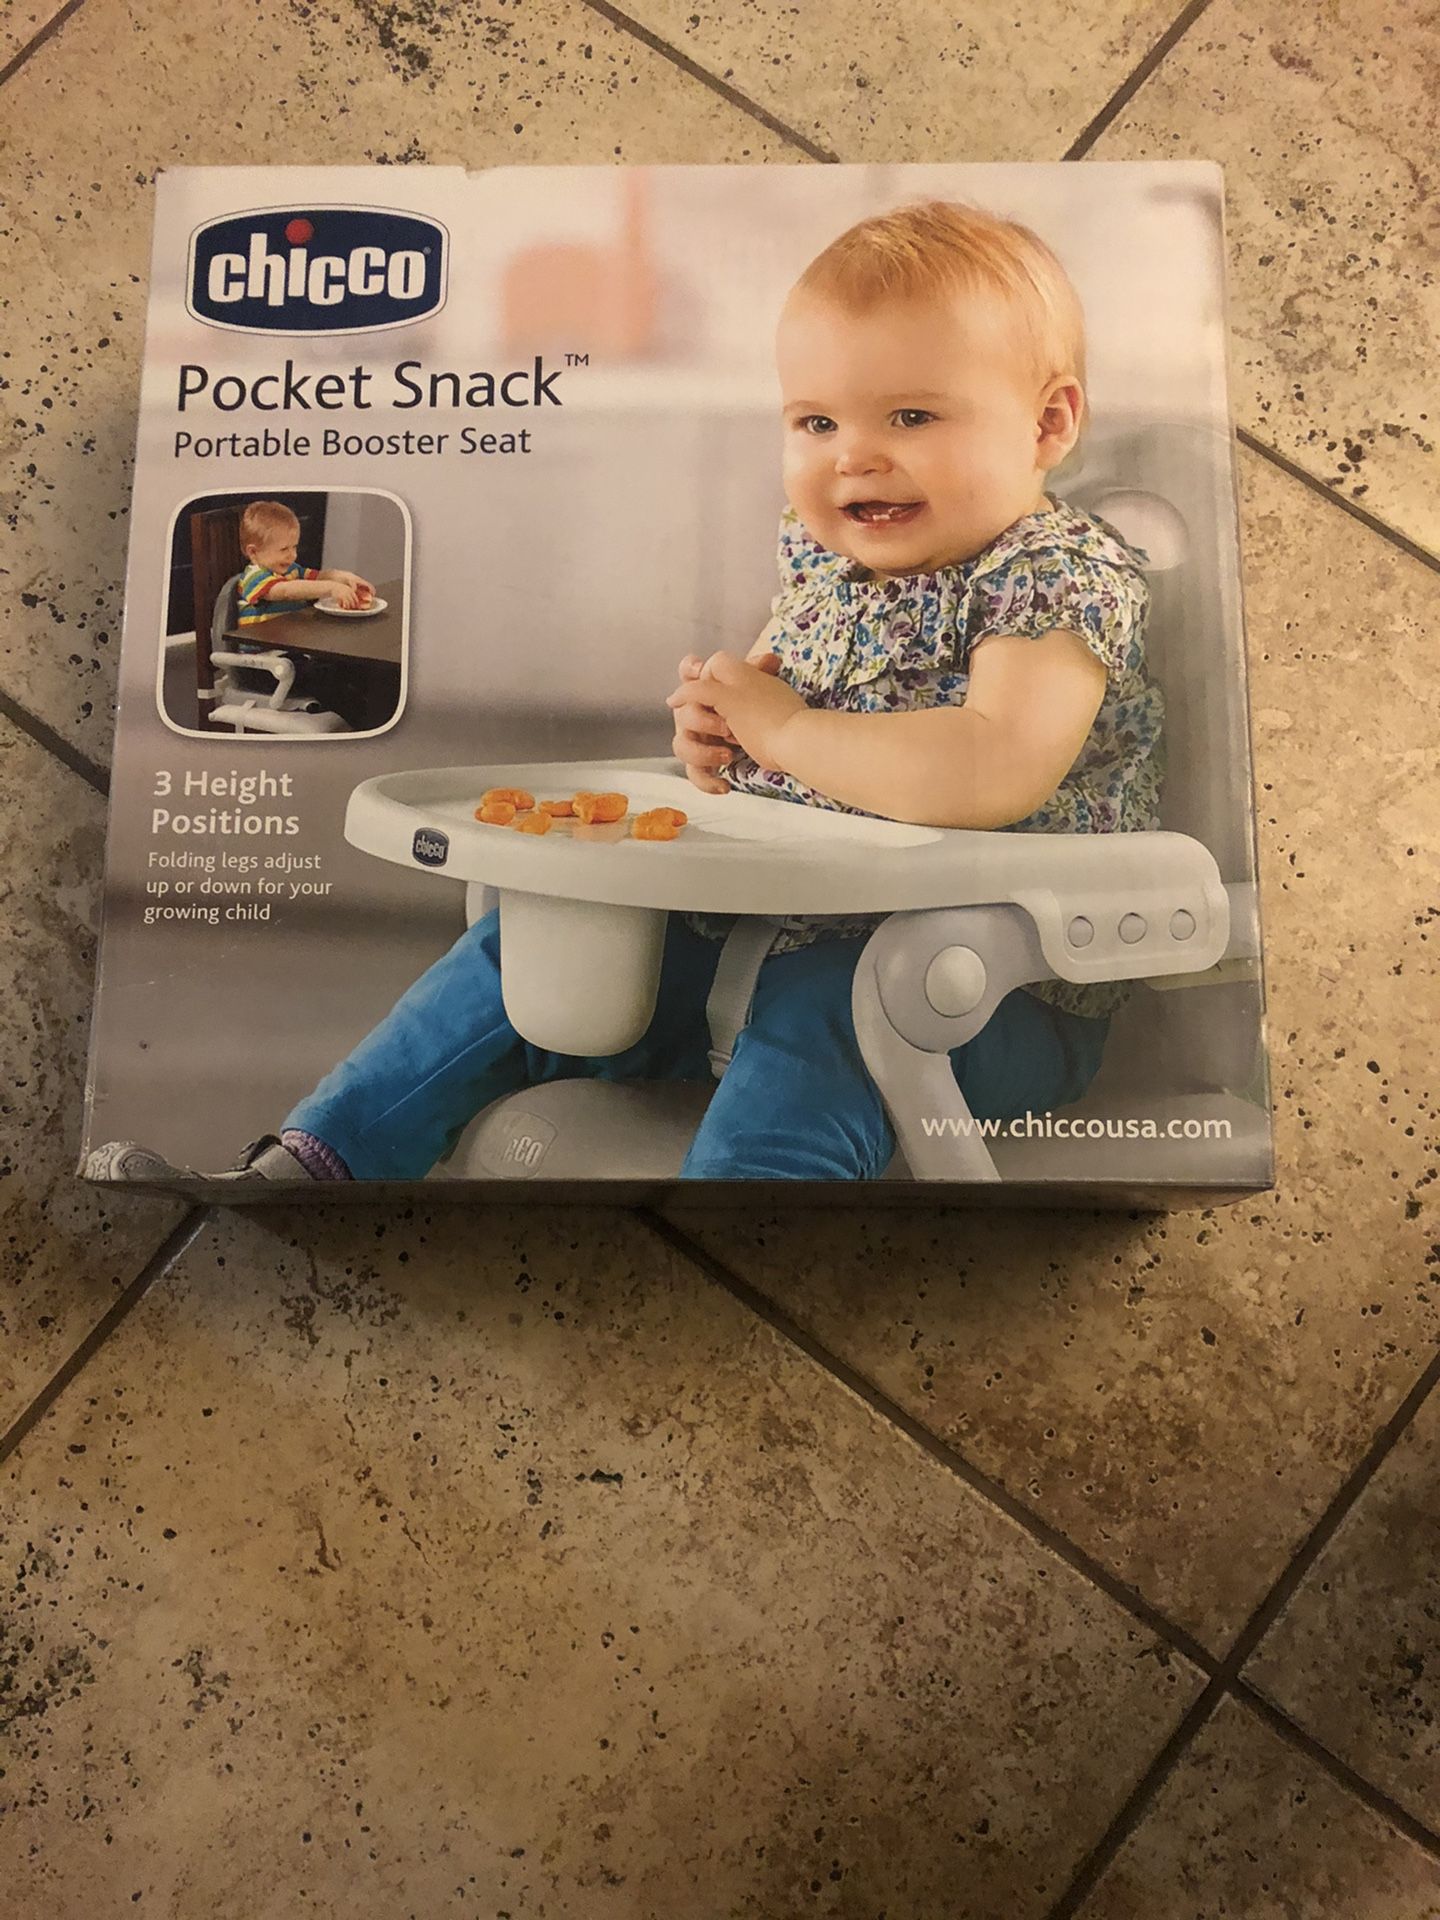 New Chico Portable booster seat